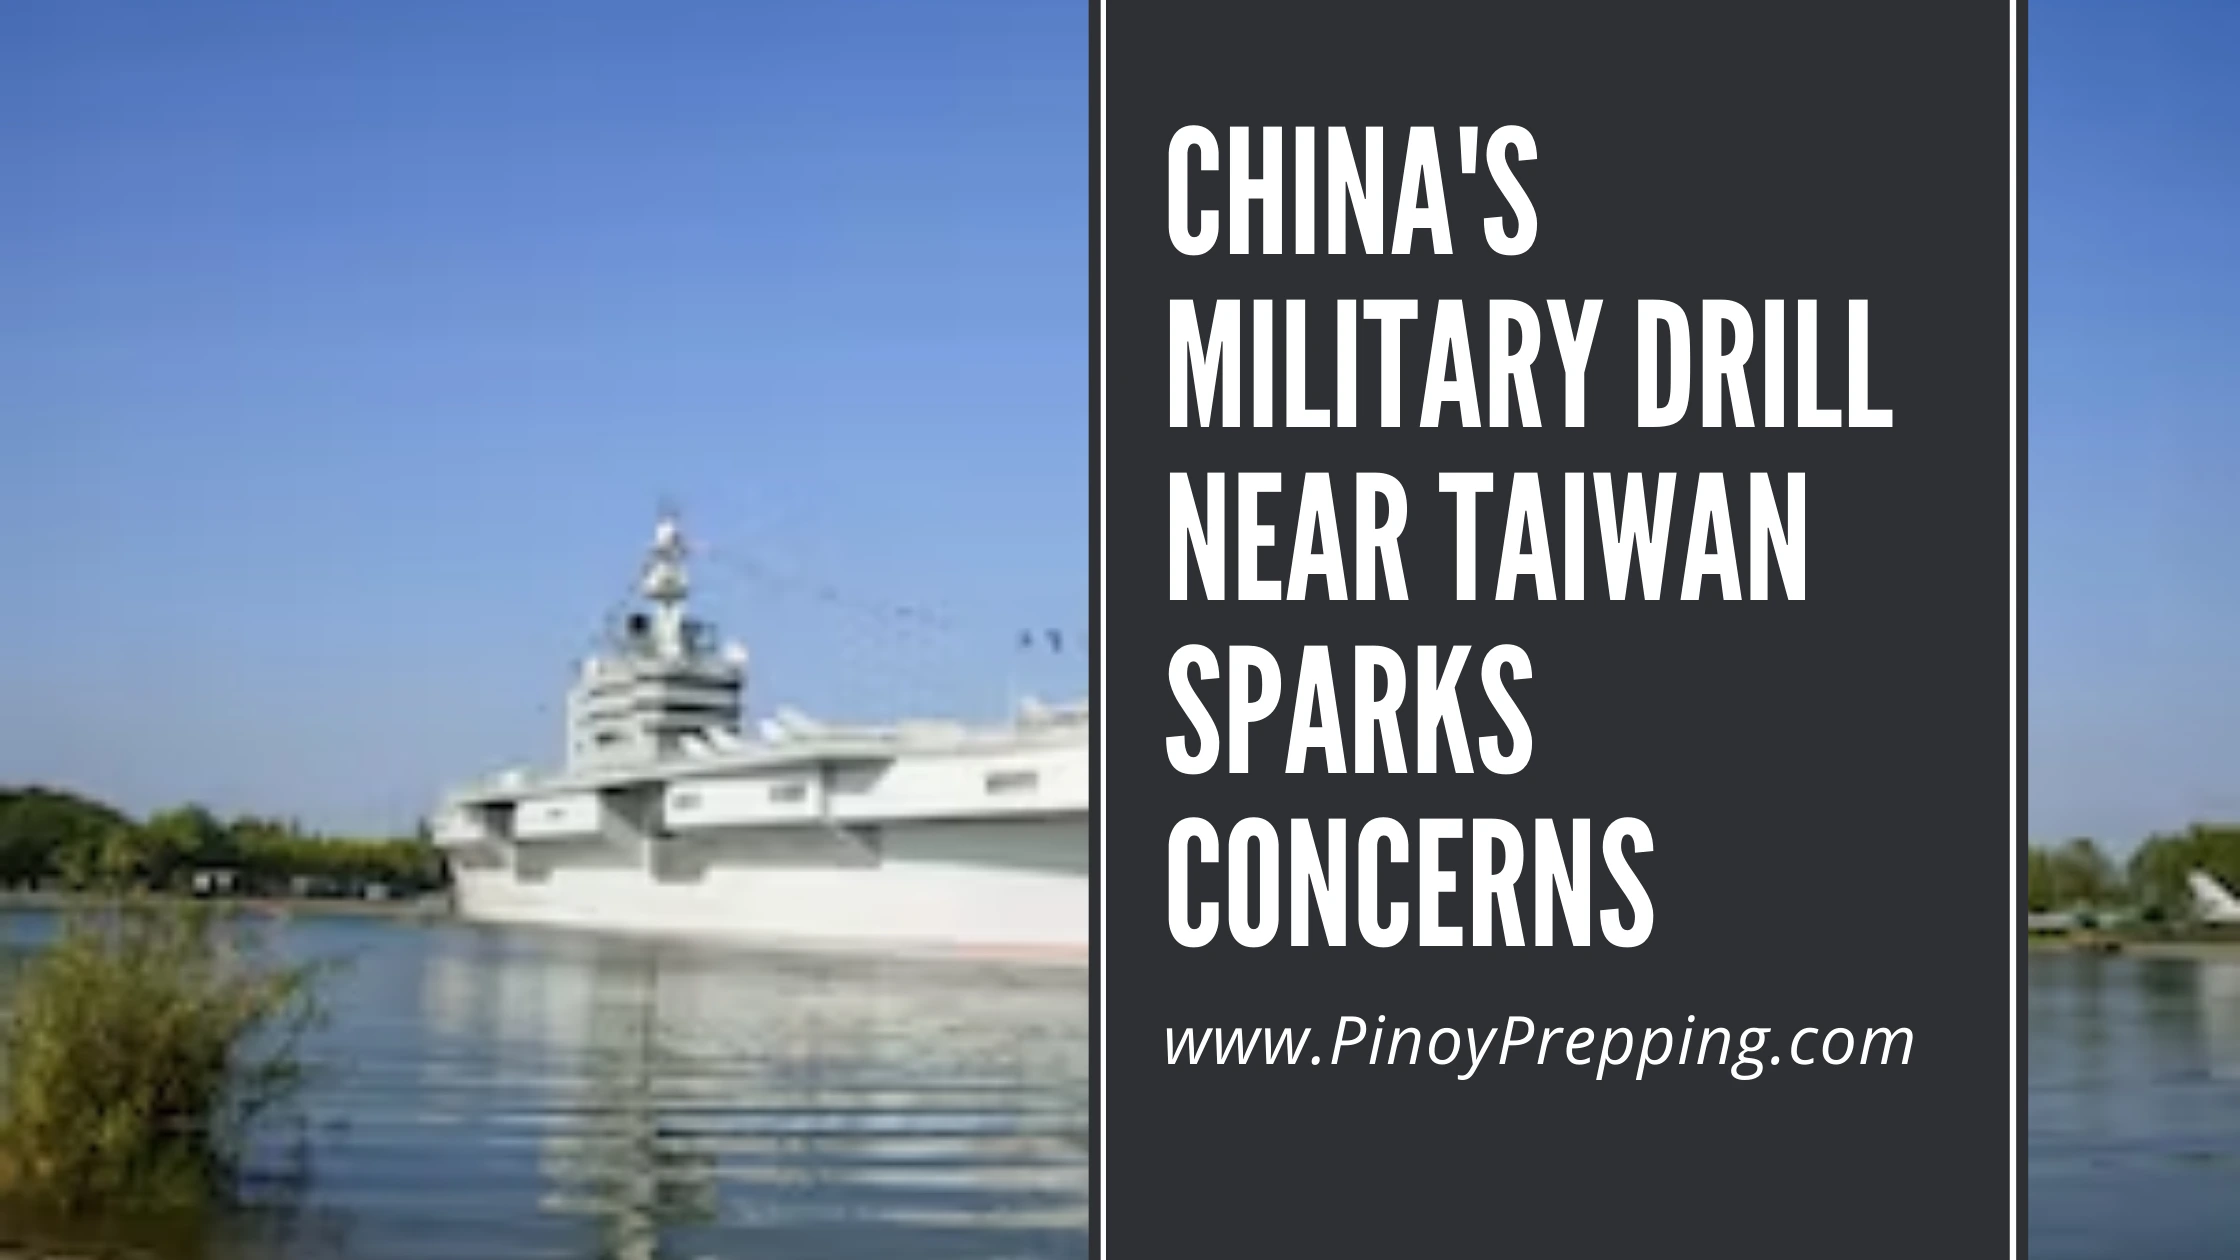 China’s military has been significantly increasing its activity around Taiwan this week, with dozens of warplanes crossing into the island’s air defense identification zone (ADIZ).